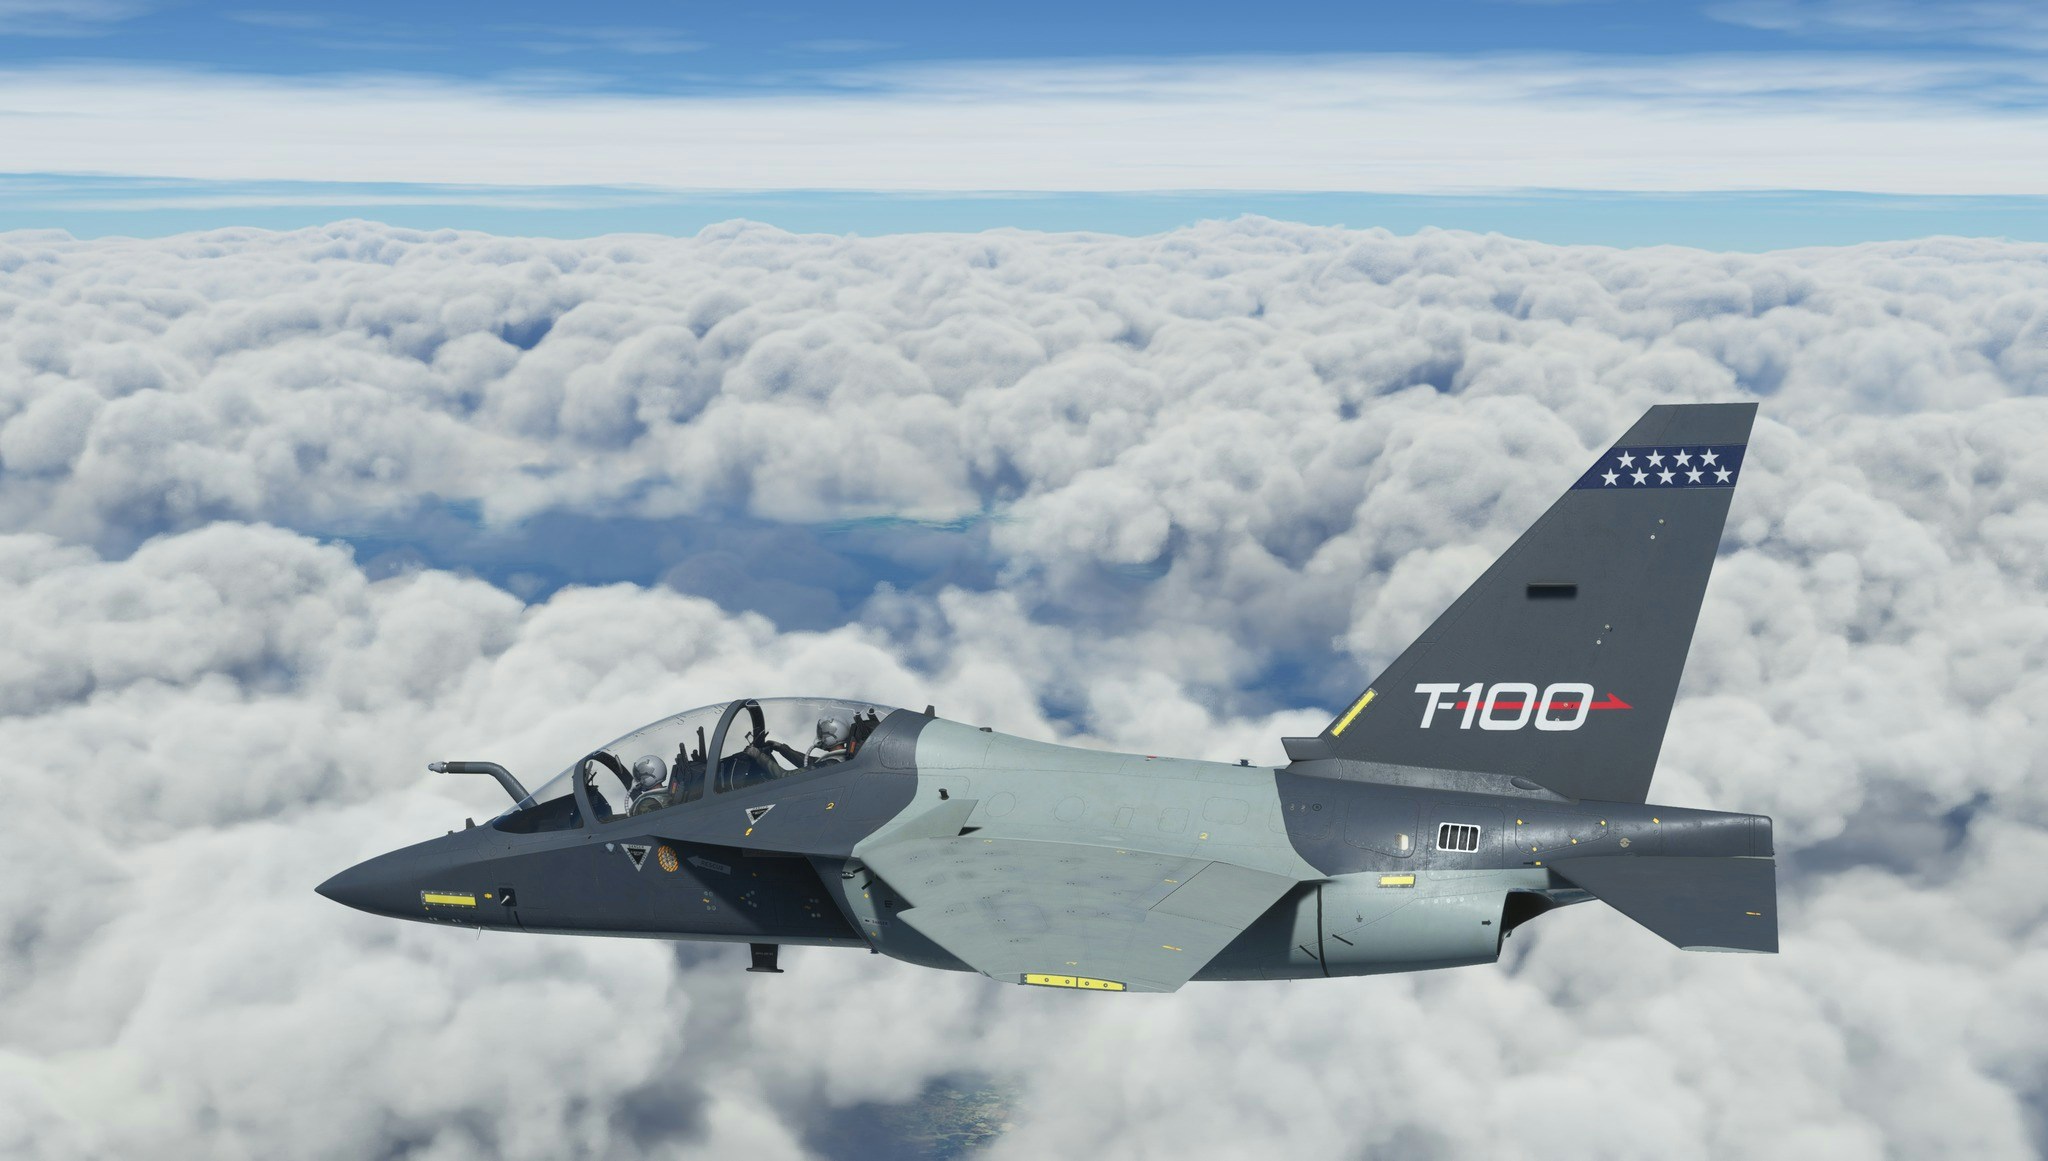 IndiaFoxtEcho Releases M-346 Master for MSFS